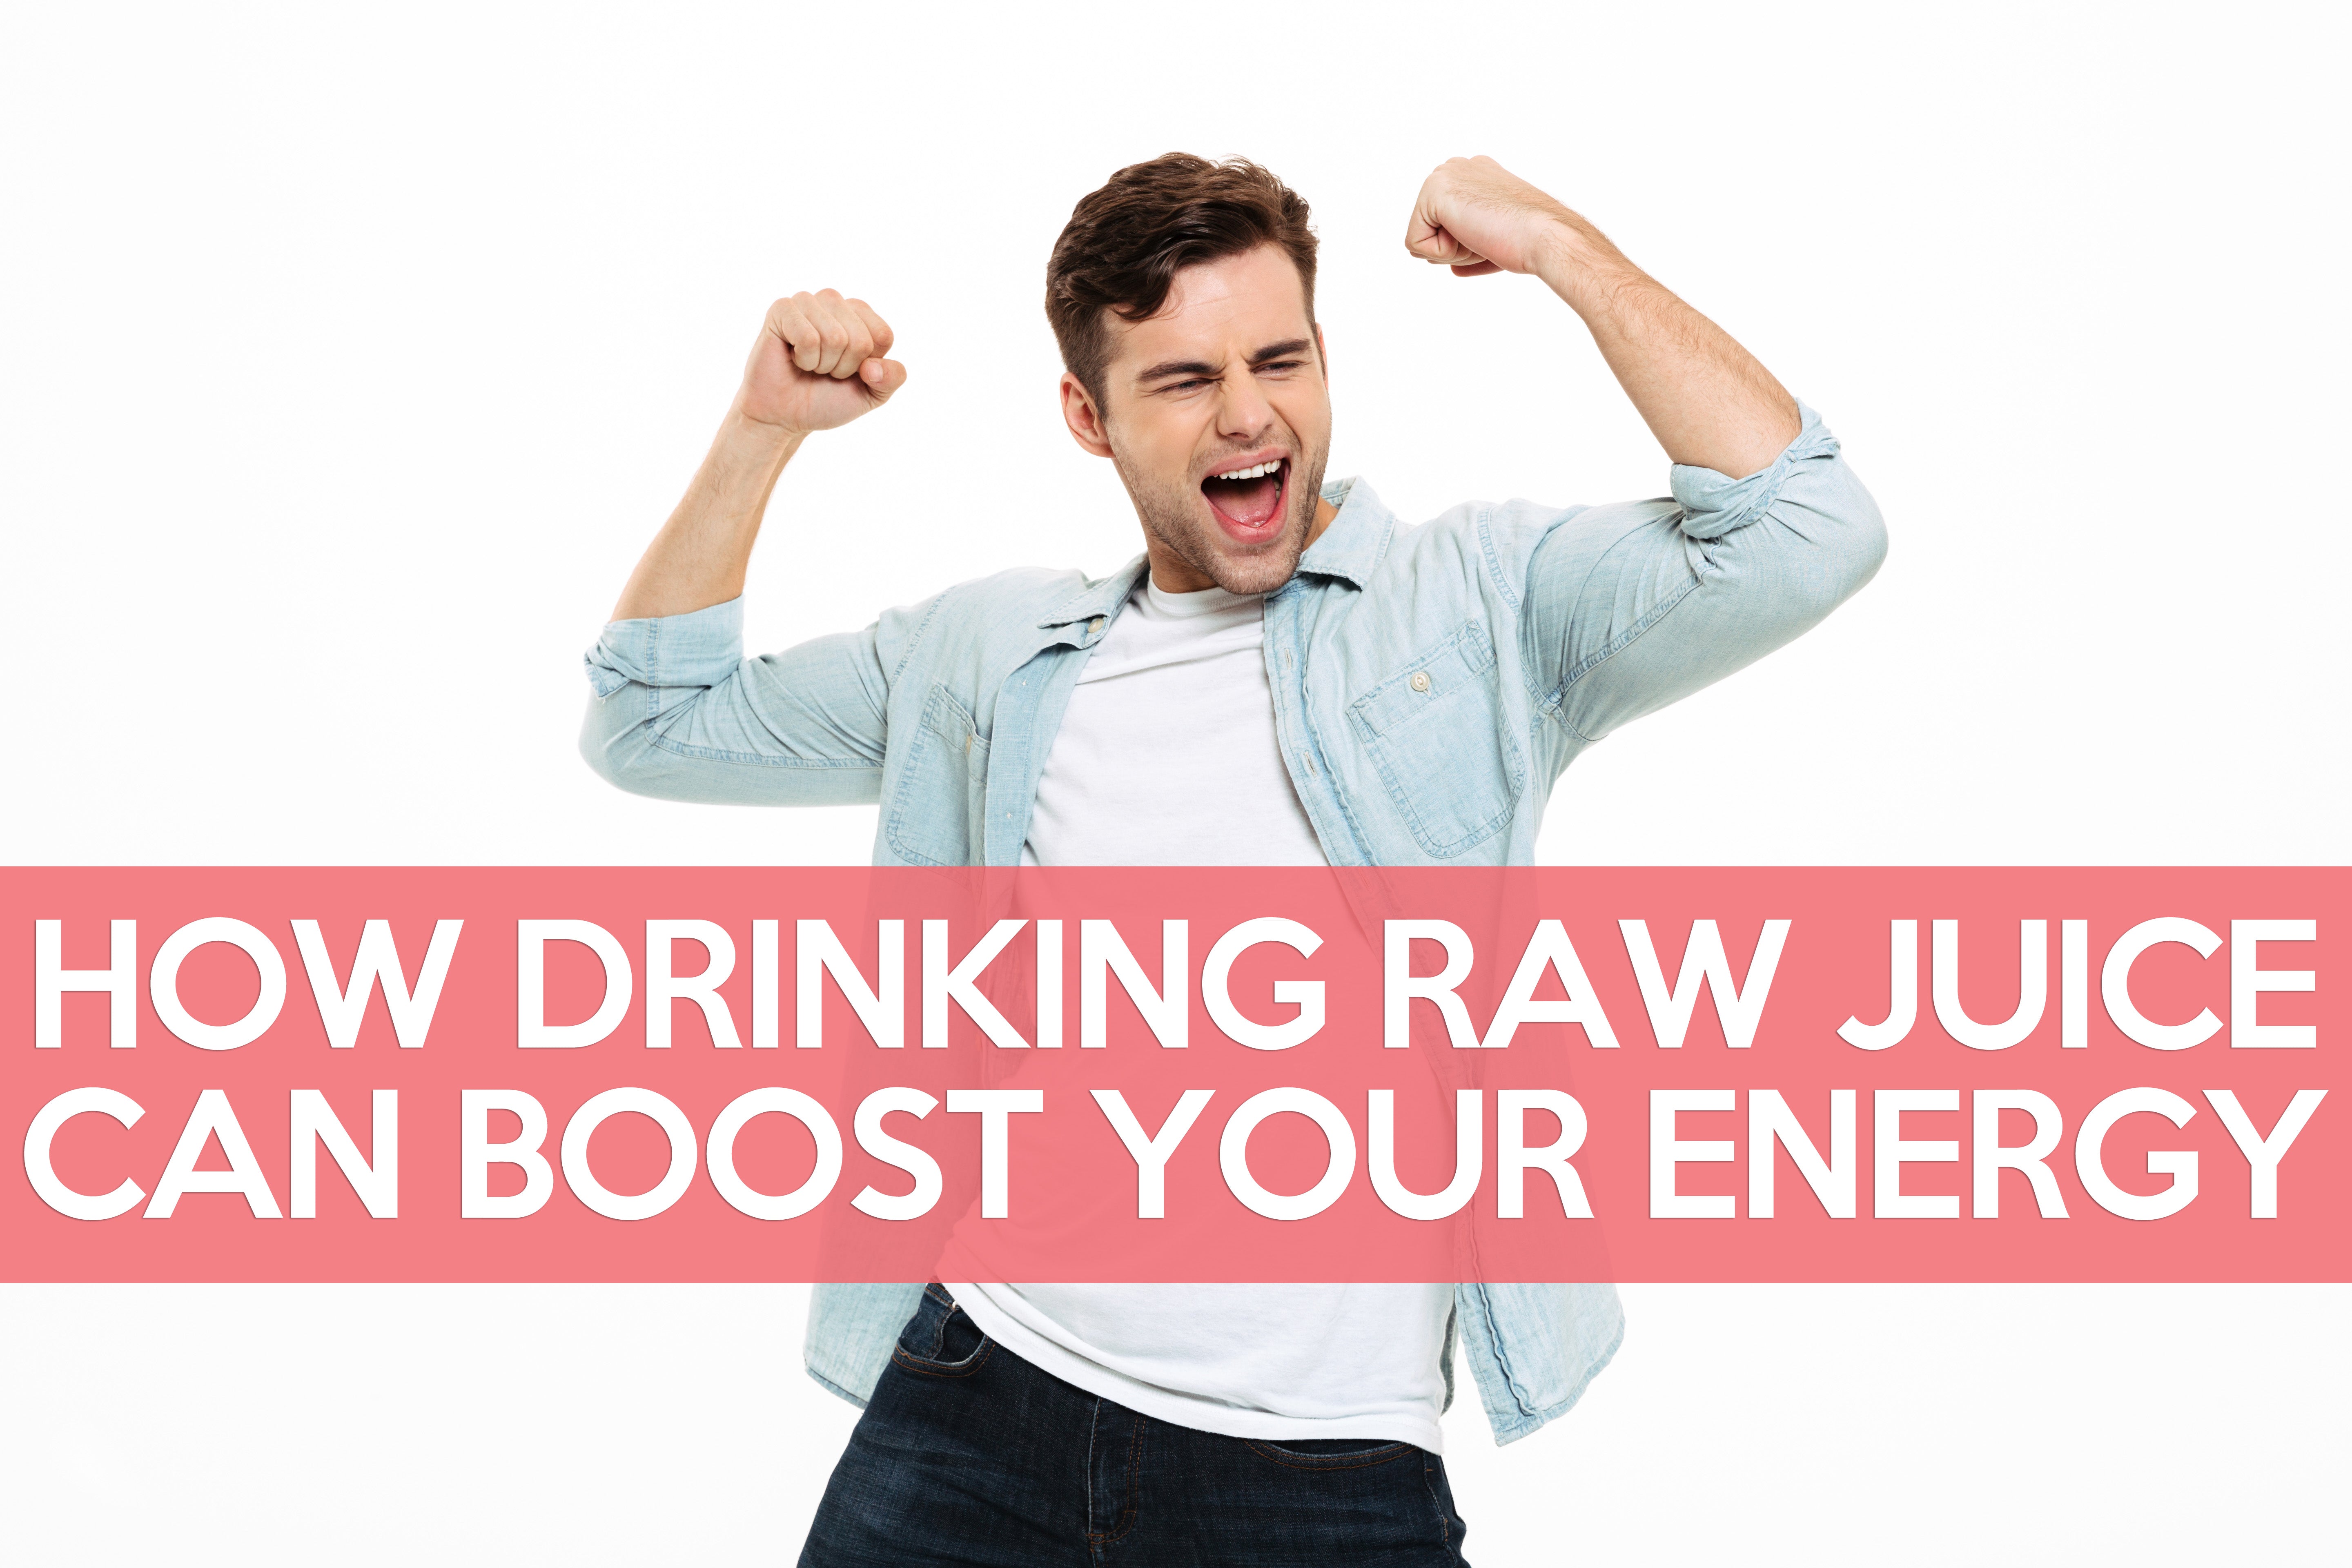 How Drinking Raw Juice Can Boost Your Energy